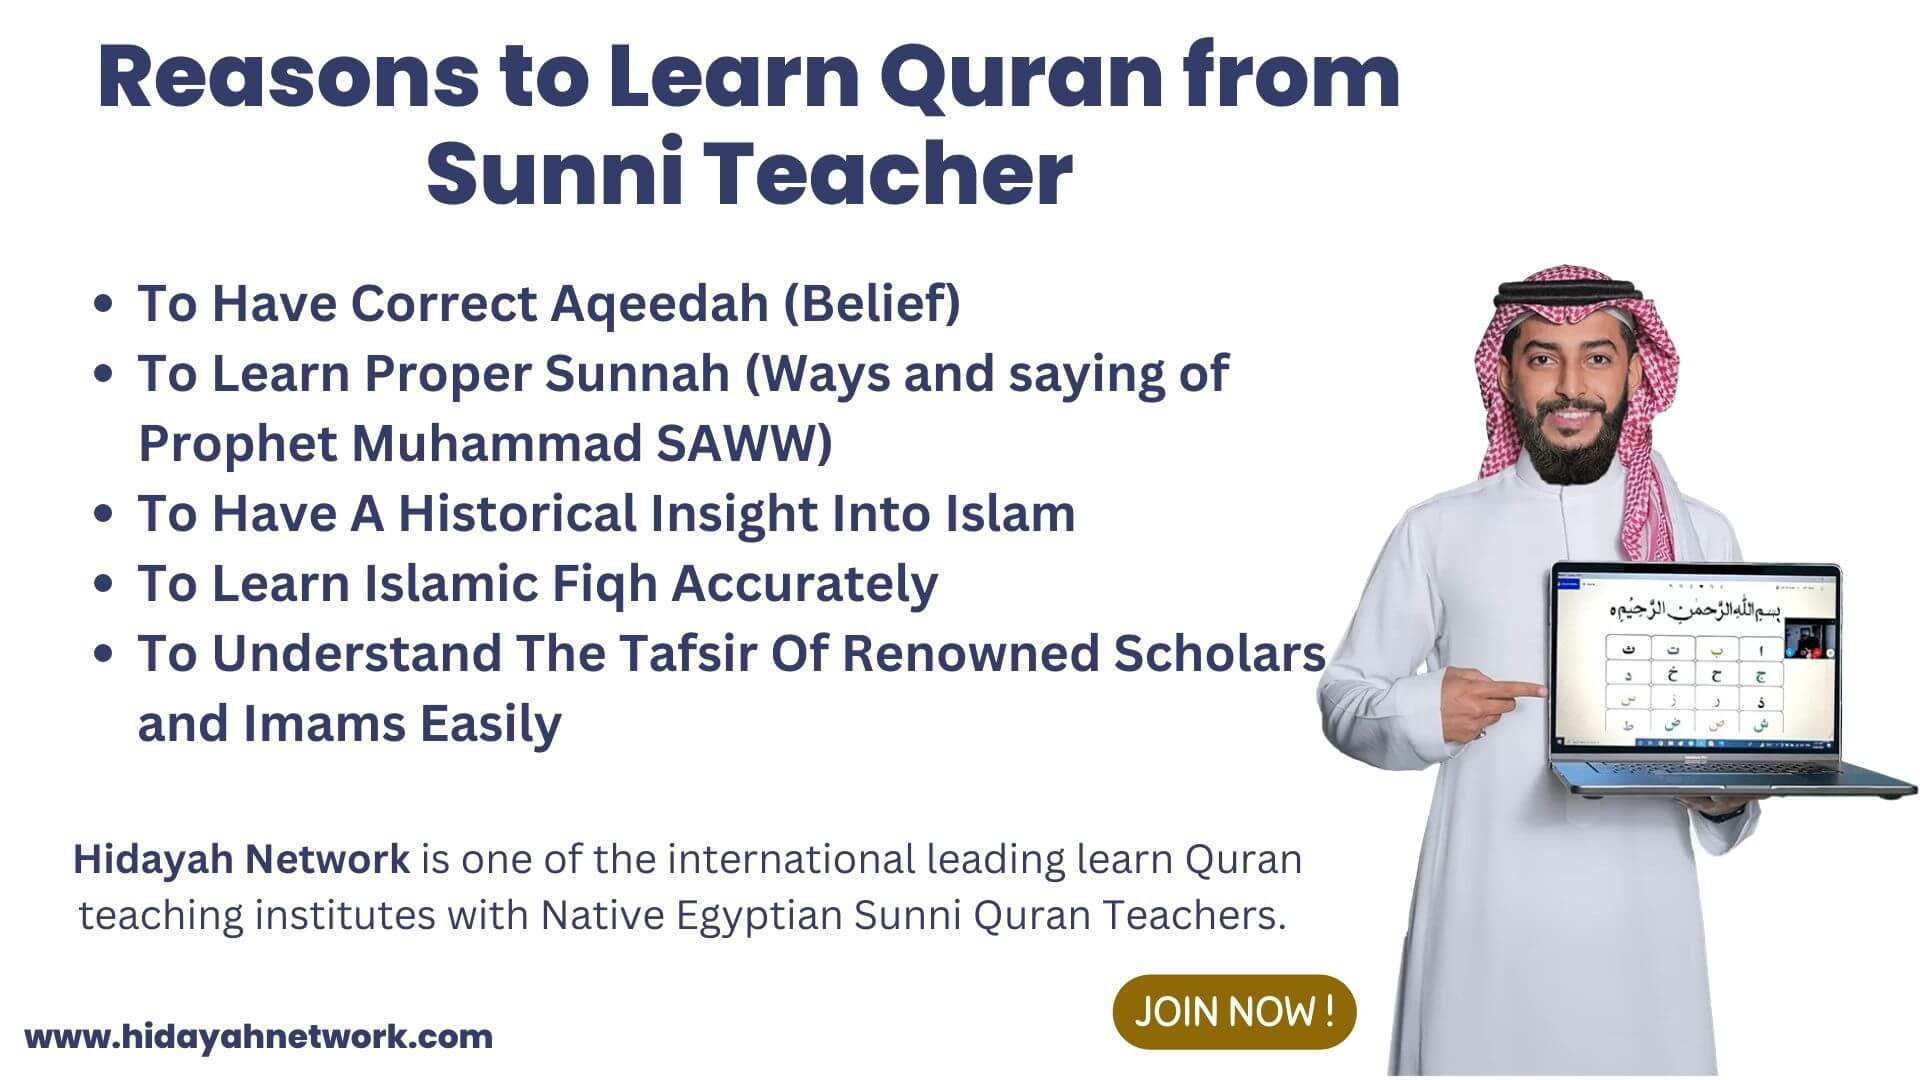 Reasons to Learn Quran from Sunni Teacher